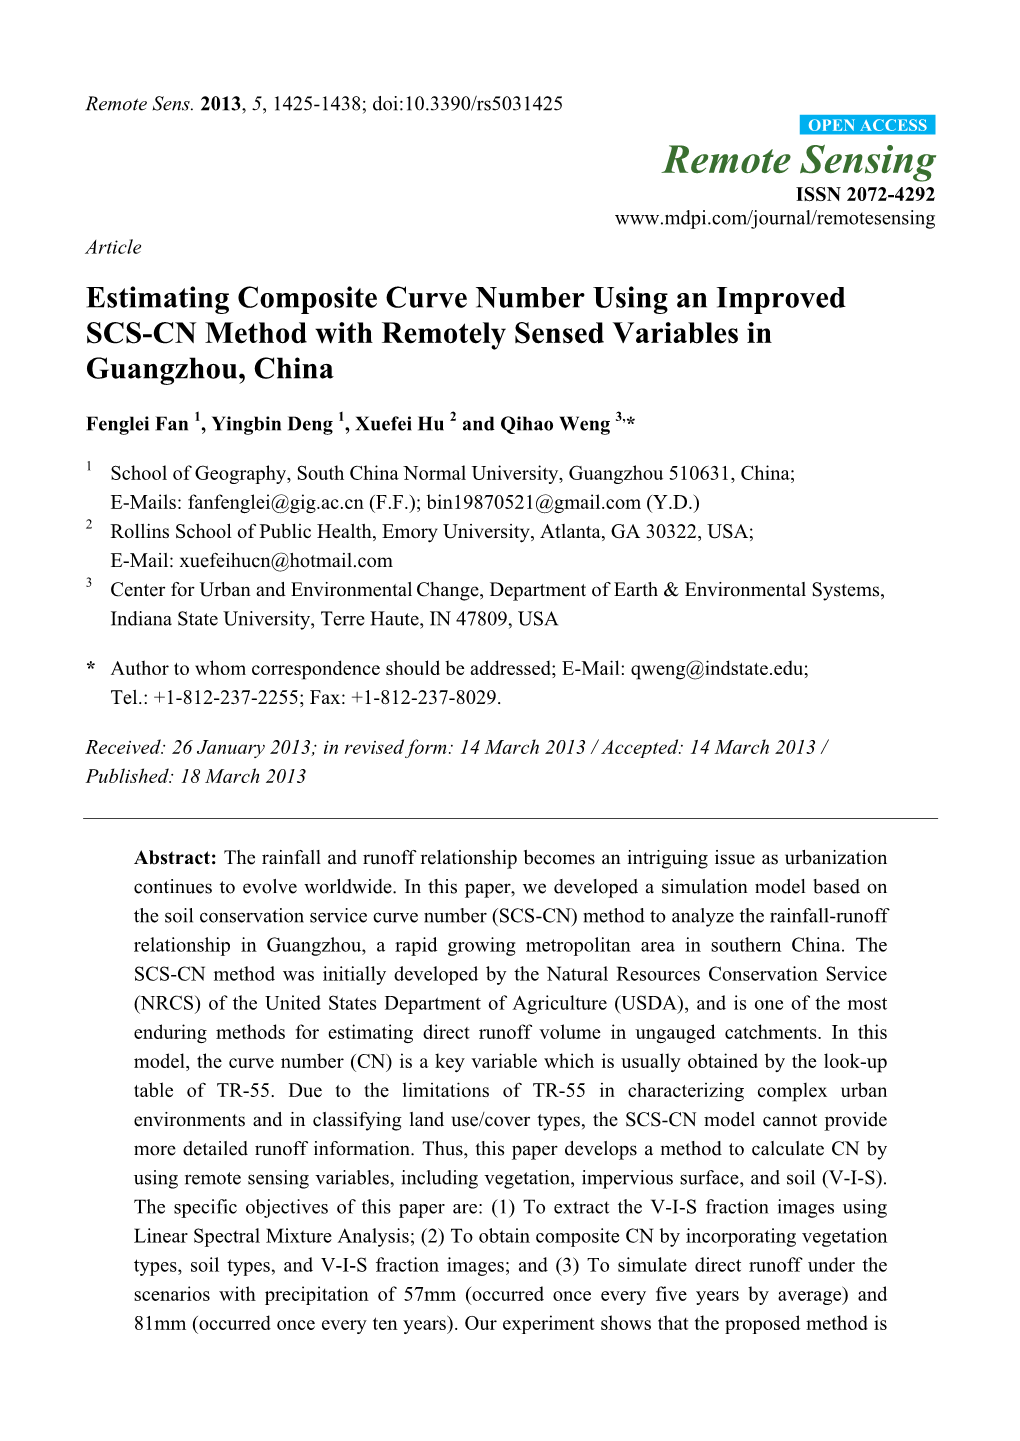 Estimating Composite Curve Number Using an Improved SCS-CN Method with Remotely Sensed Variables in Guangzhou, China